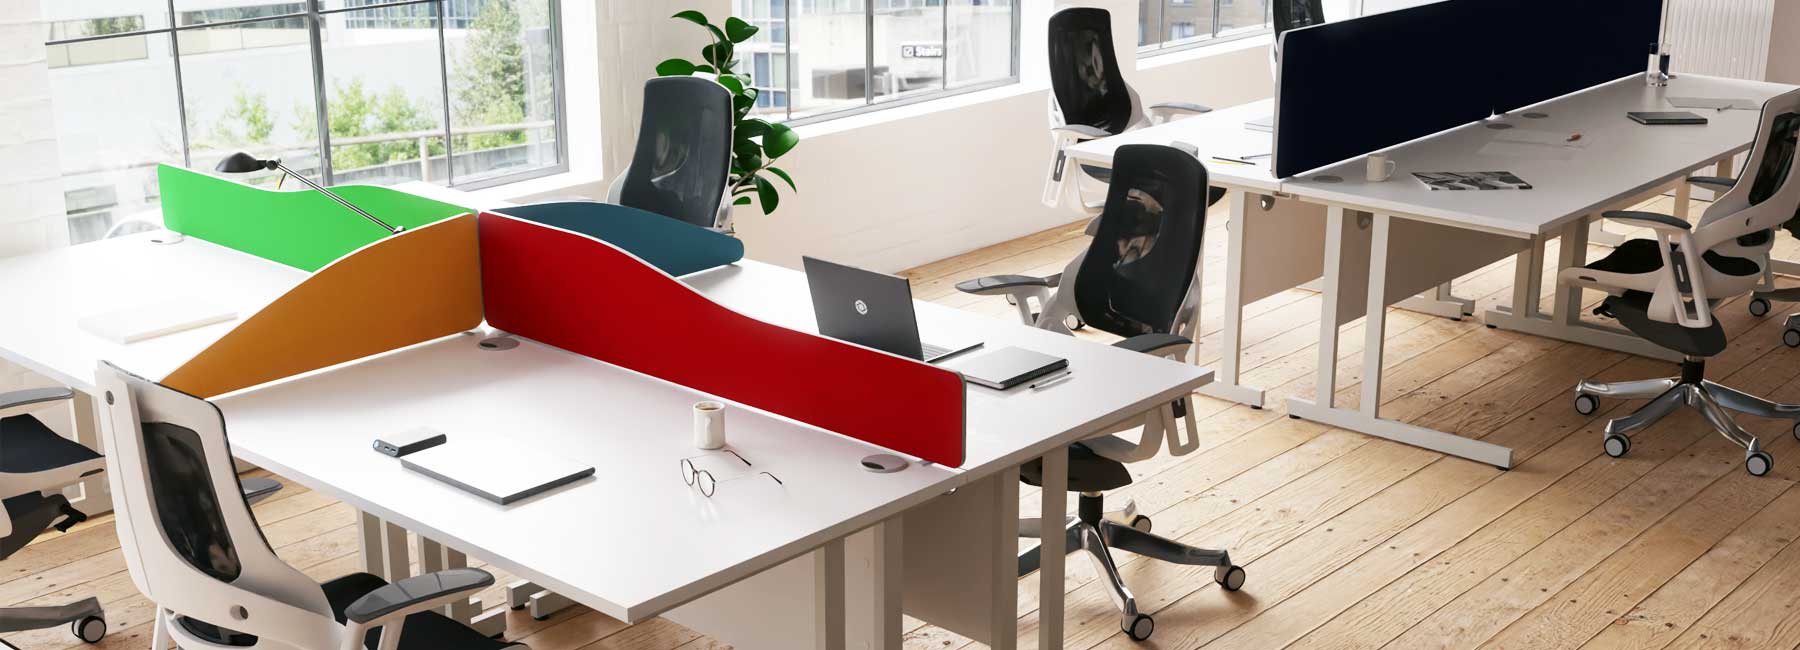 office furniture colour solutions brighten your workspace